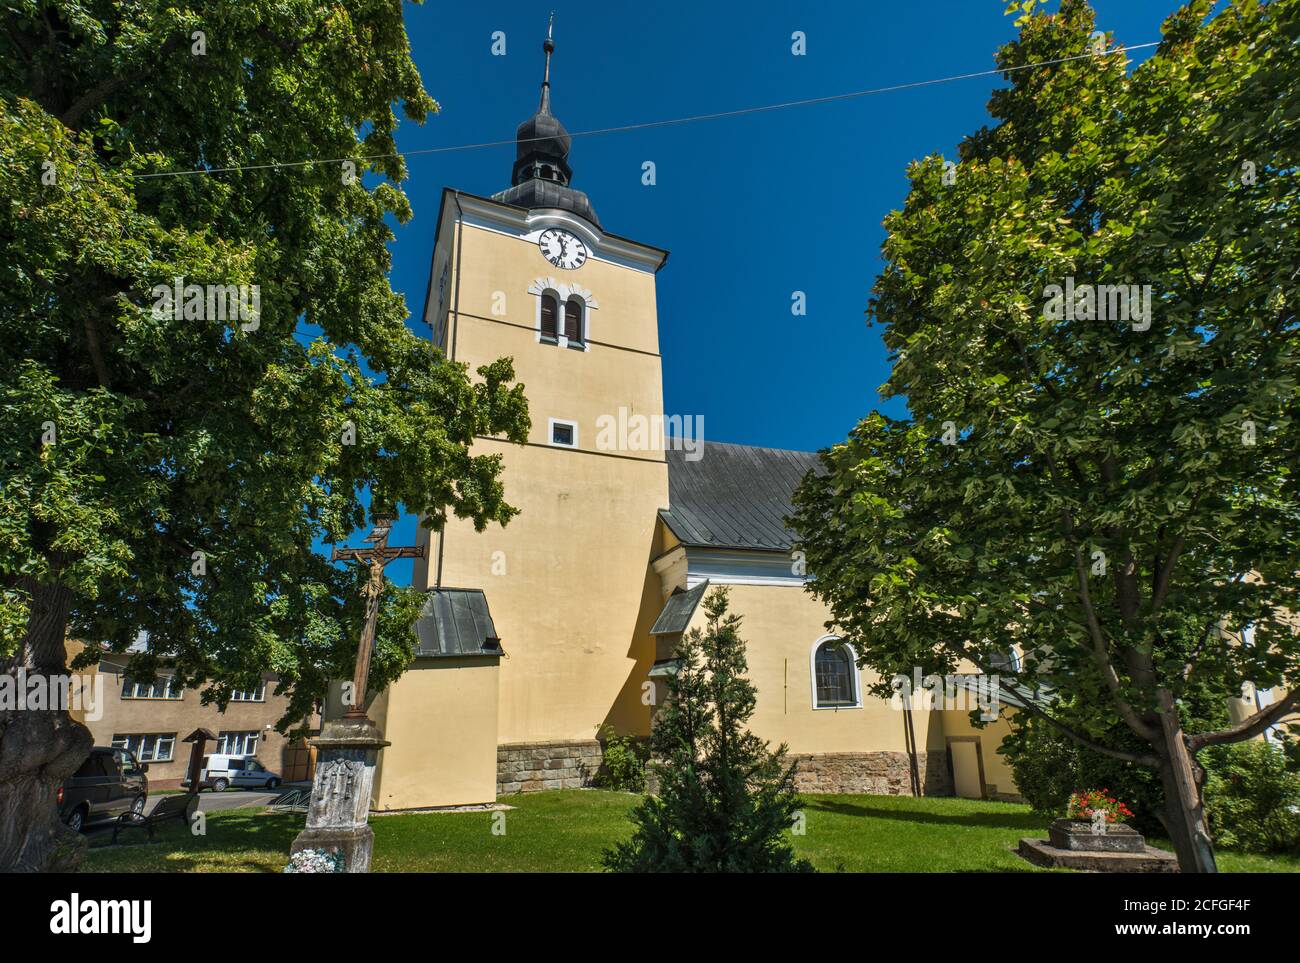 Valasske Klobouky High Resolution Stock Photography and Images - Alamy